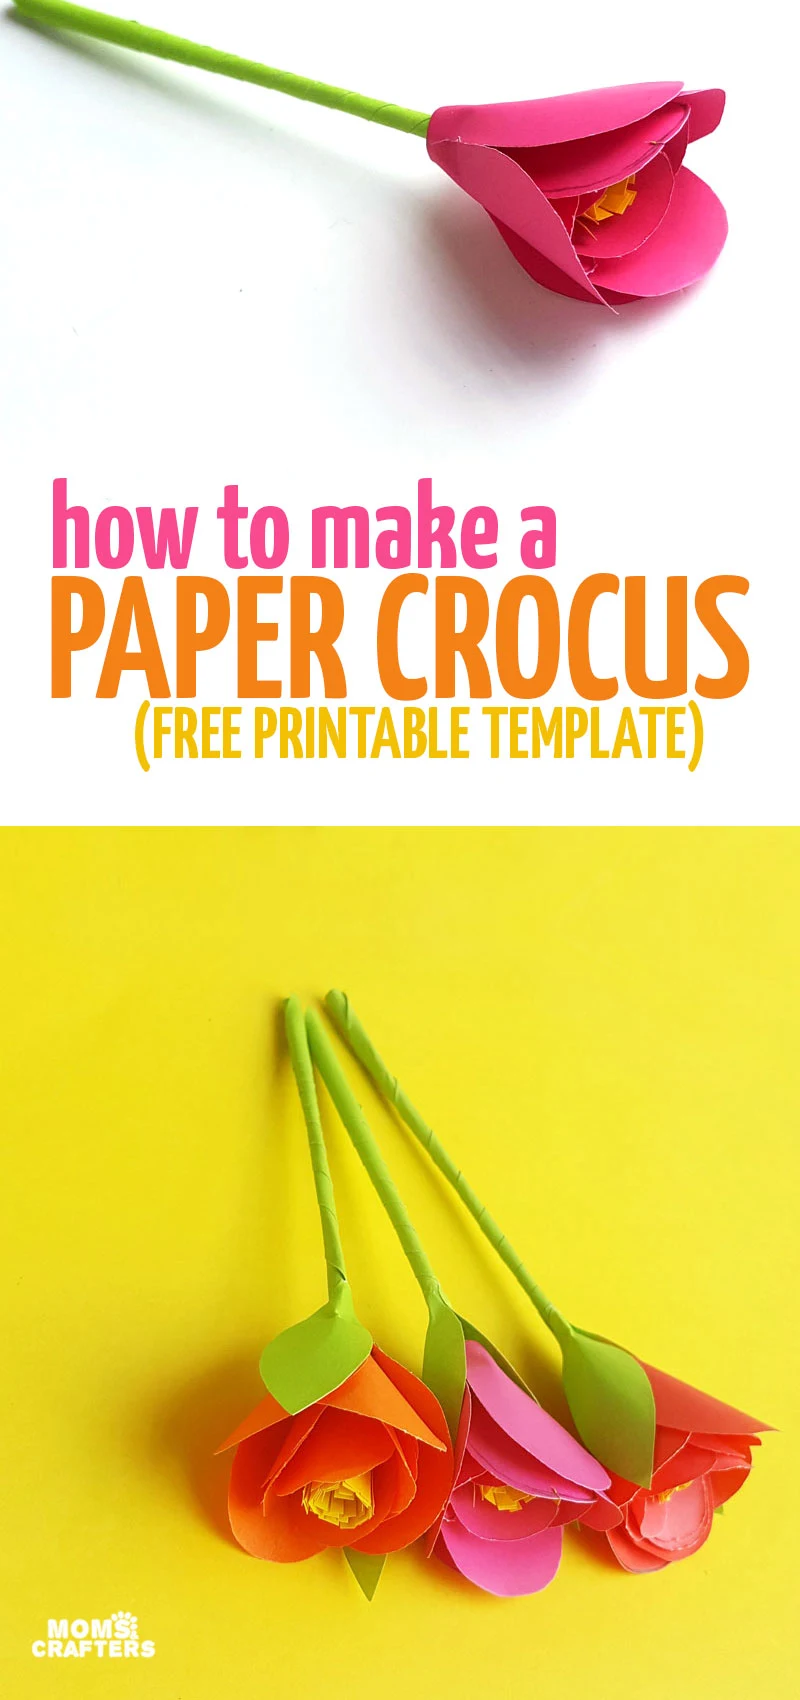 Learn how to make these beautiful paper crocus flowers - easy DIY paper flowers for beginners! It includes a free printable template to make your own from scratch